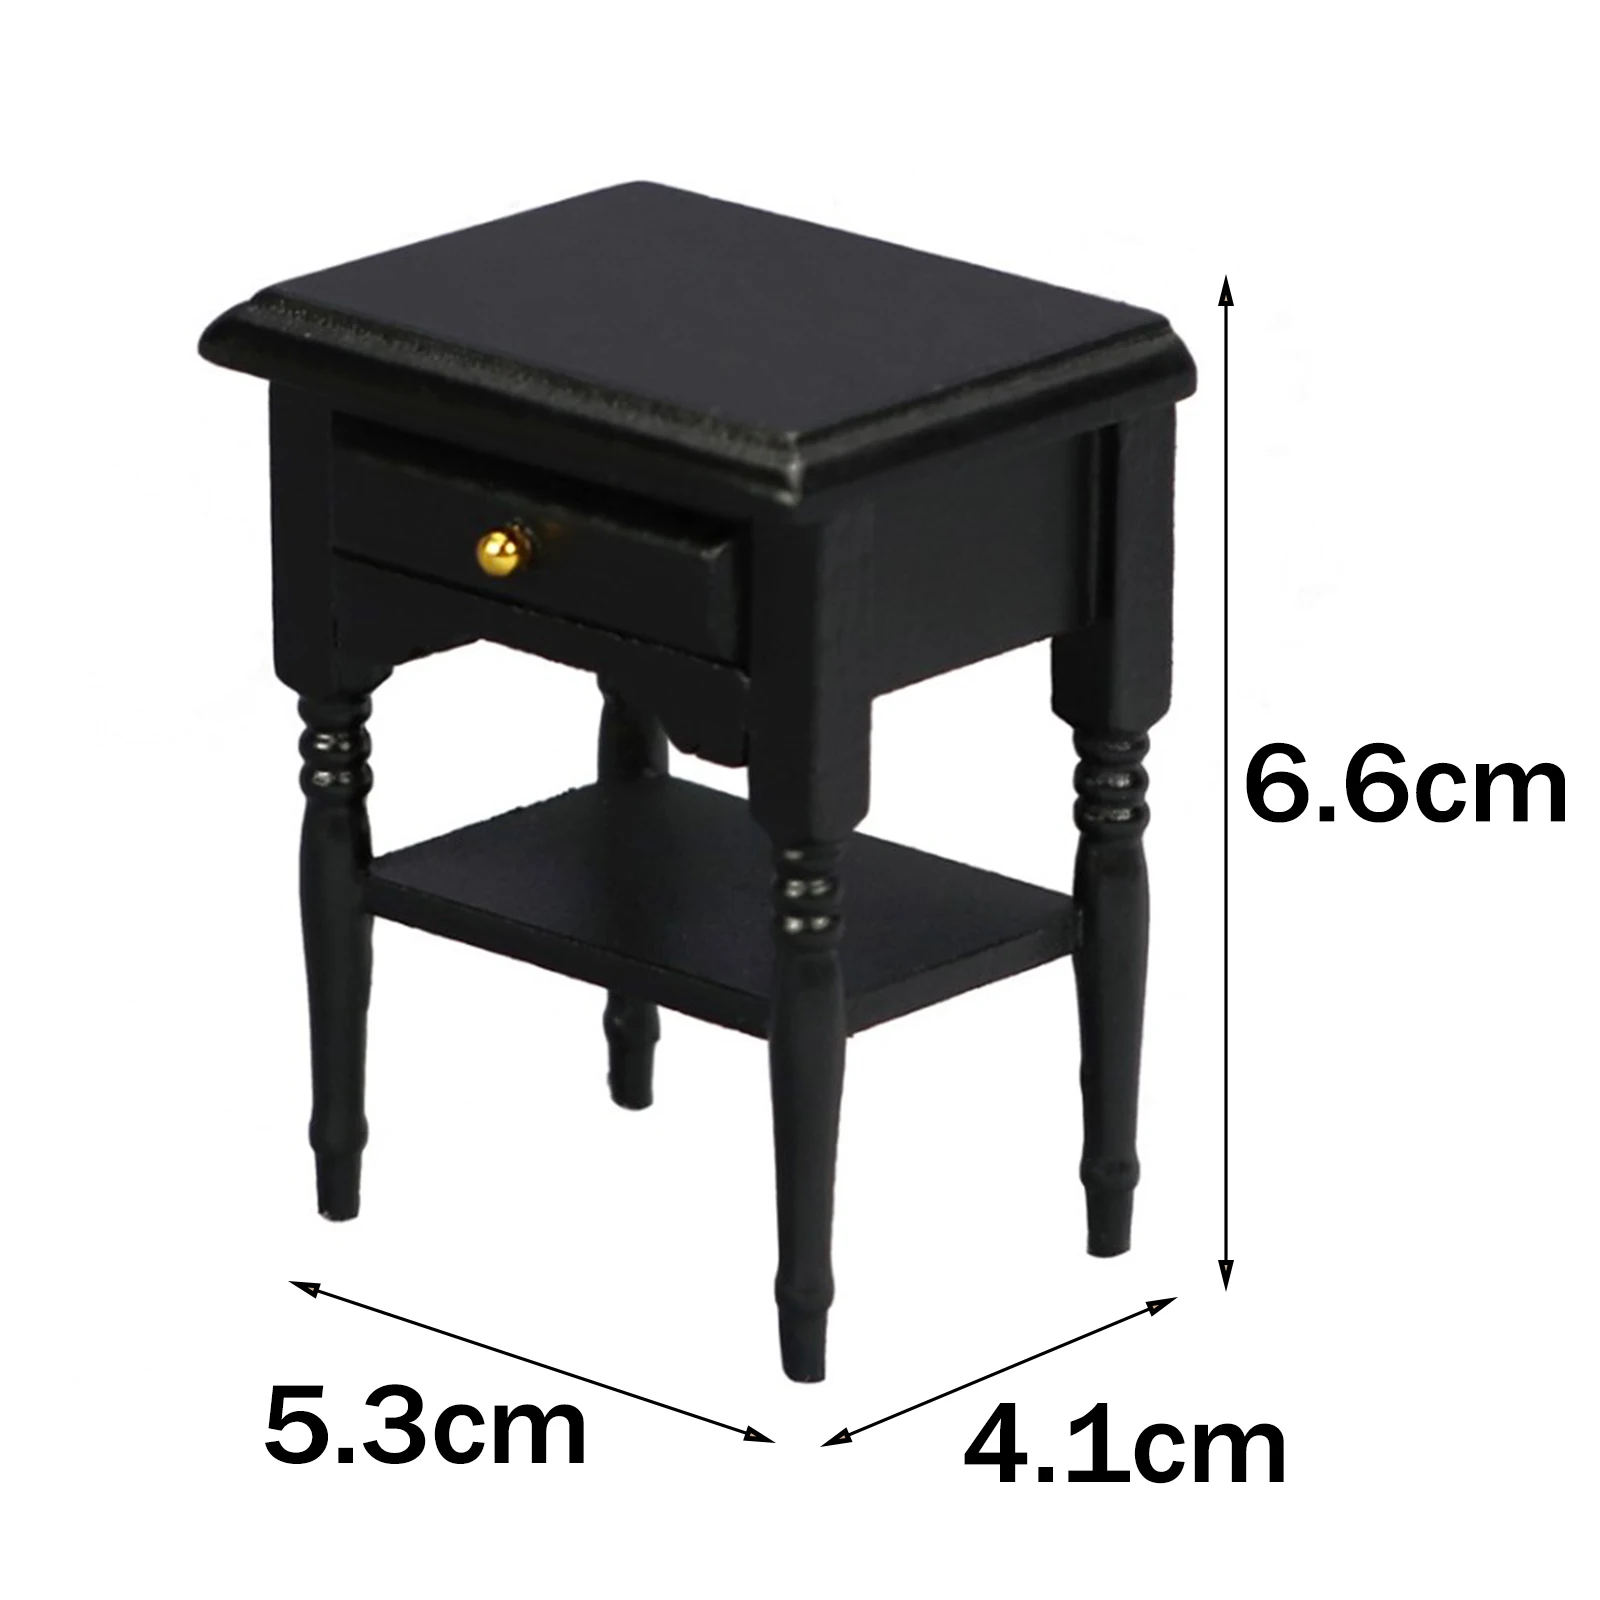 1:12 Dollhouse Wooden Bedside Table, Miniature Birch Nigh Table Nightstand for Room Bedroom Furniture Set Accessory DIY Black